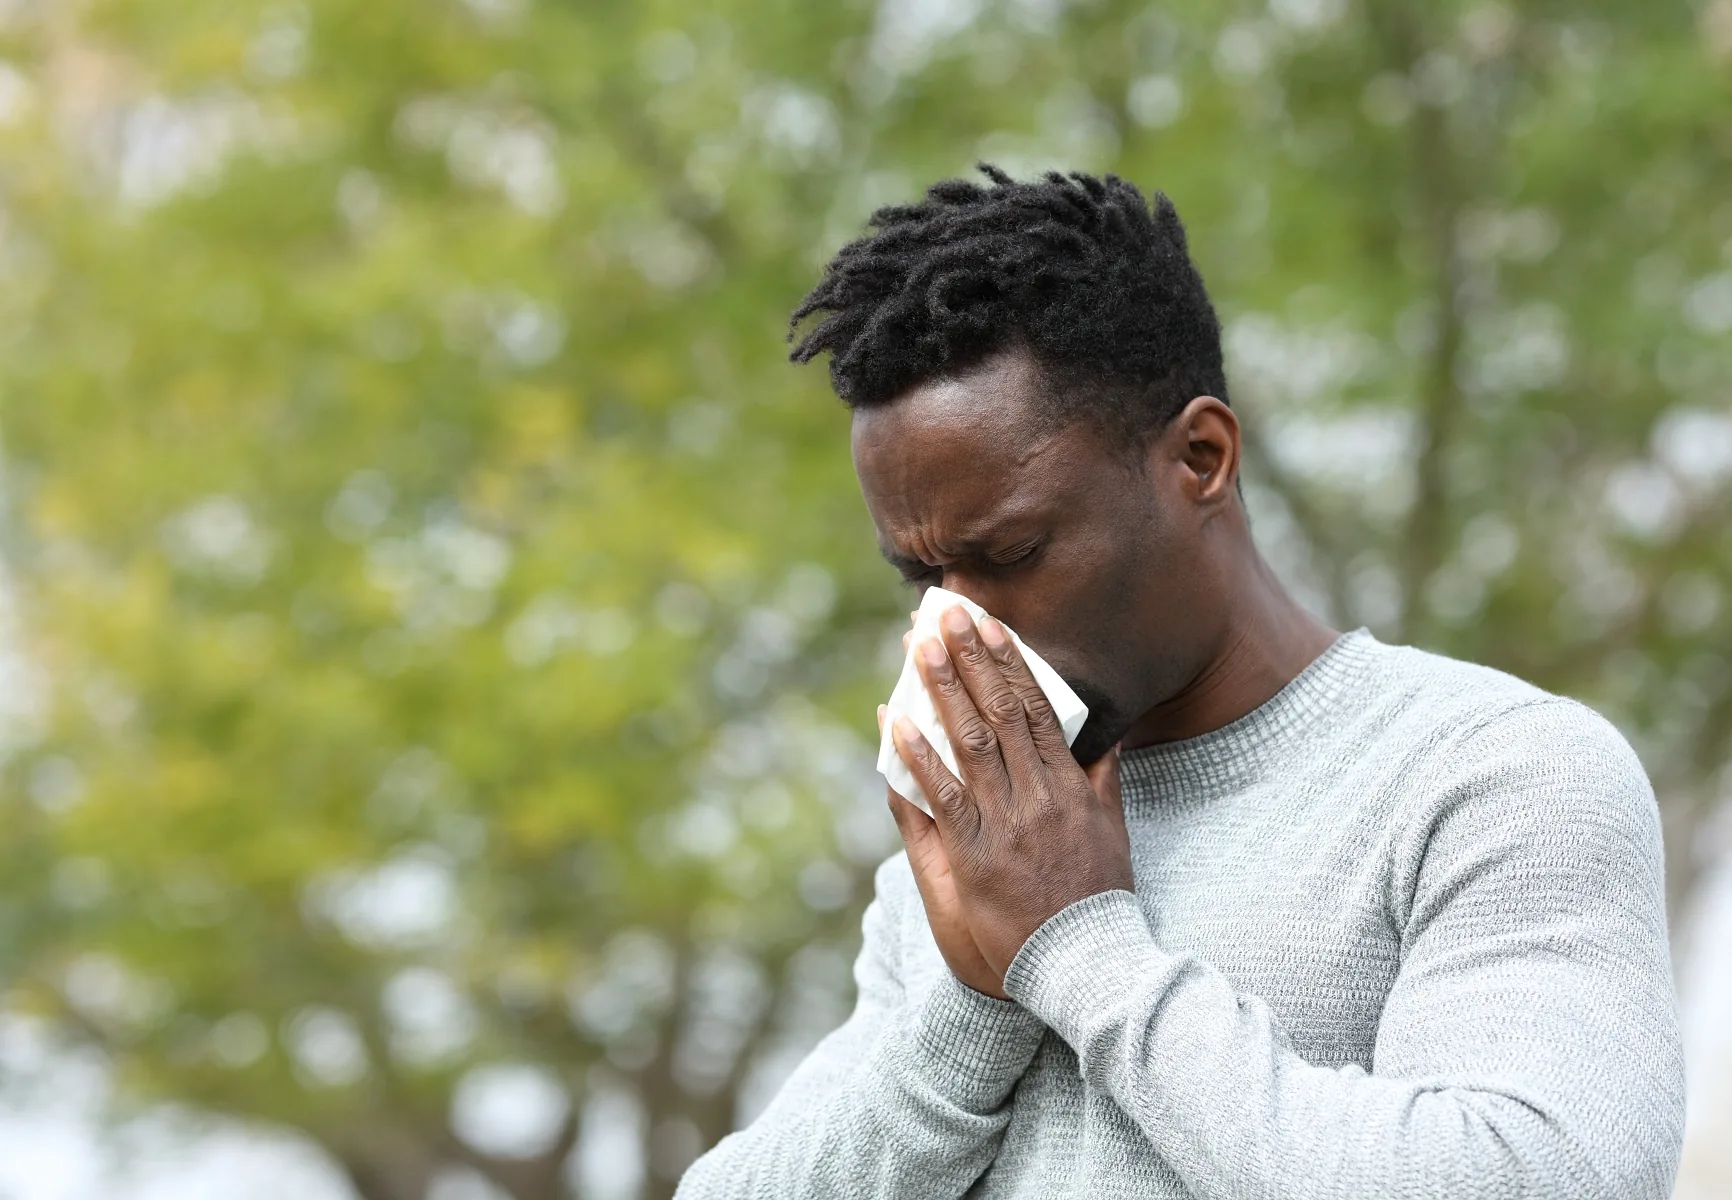 African American man blowing his nose outside